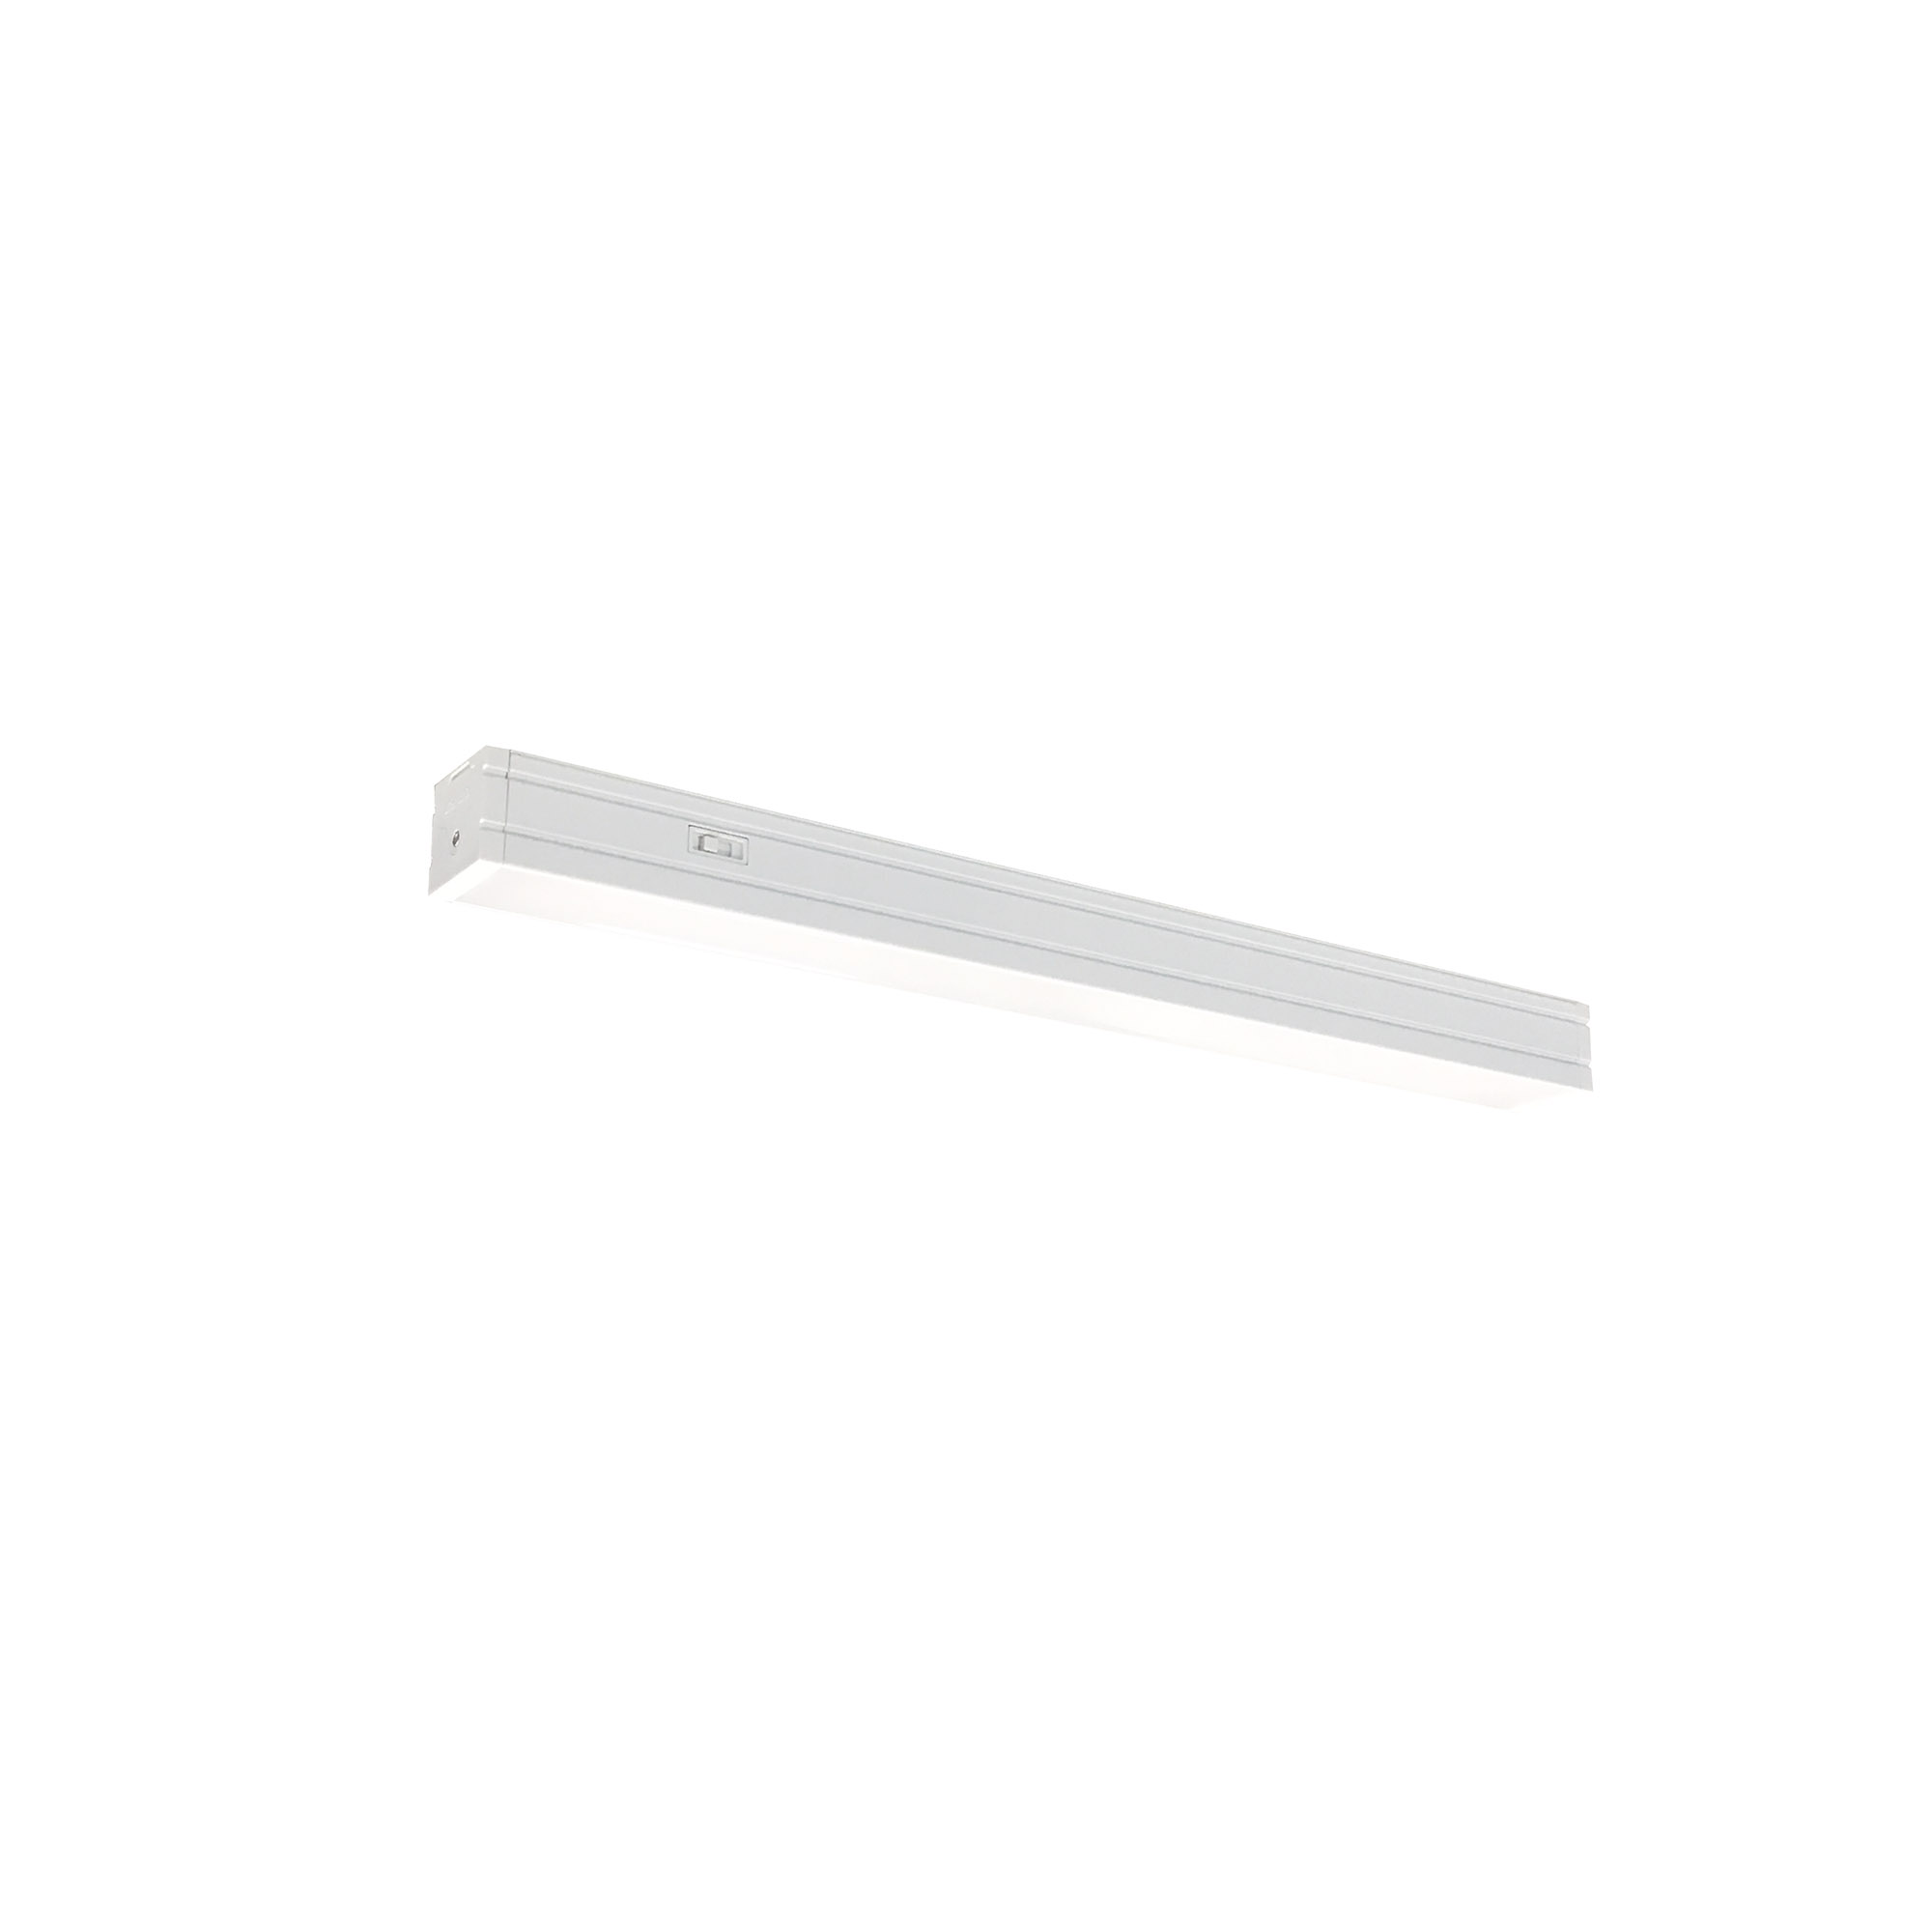 NUDTW-9812
10W CCT Sel 120V Dim White 12&quot; 
LED Linear Frosted Lens